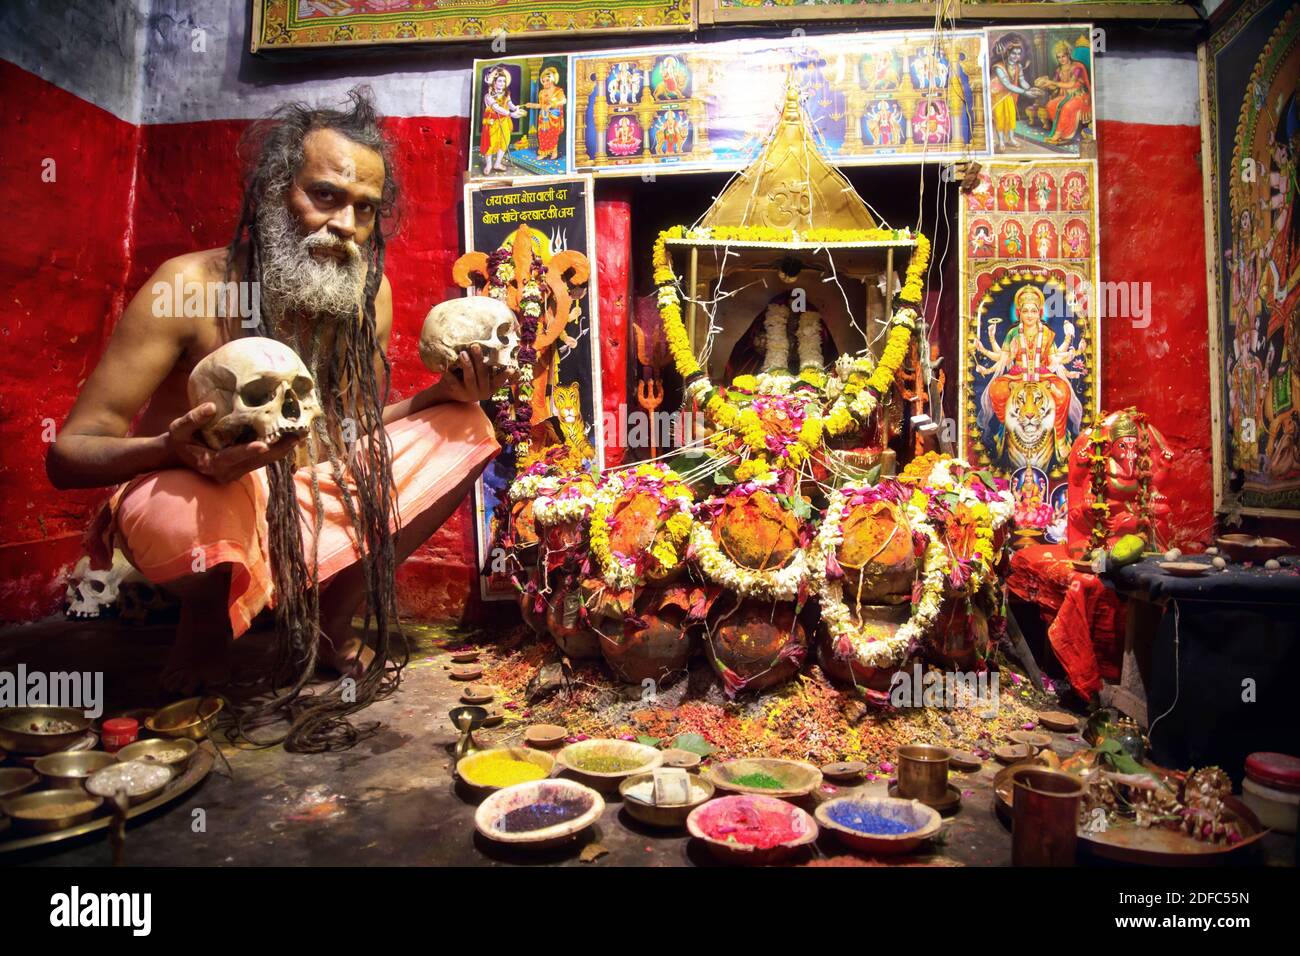 India, portrait of Aghori cannibal sadhu holy man in front of decorated temple in Varanasi Stock Photo